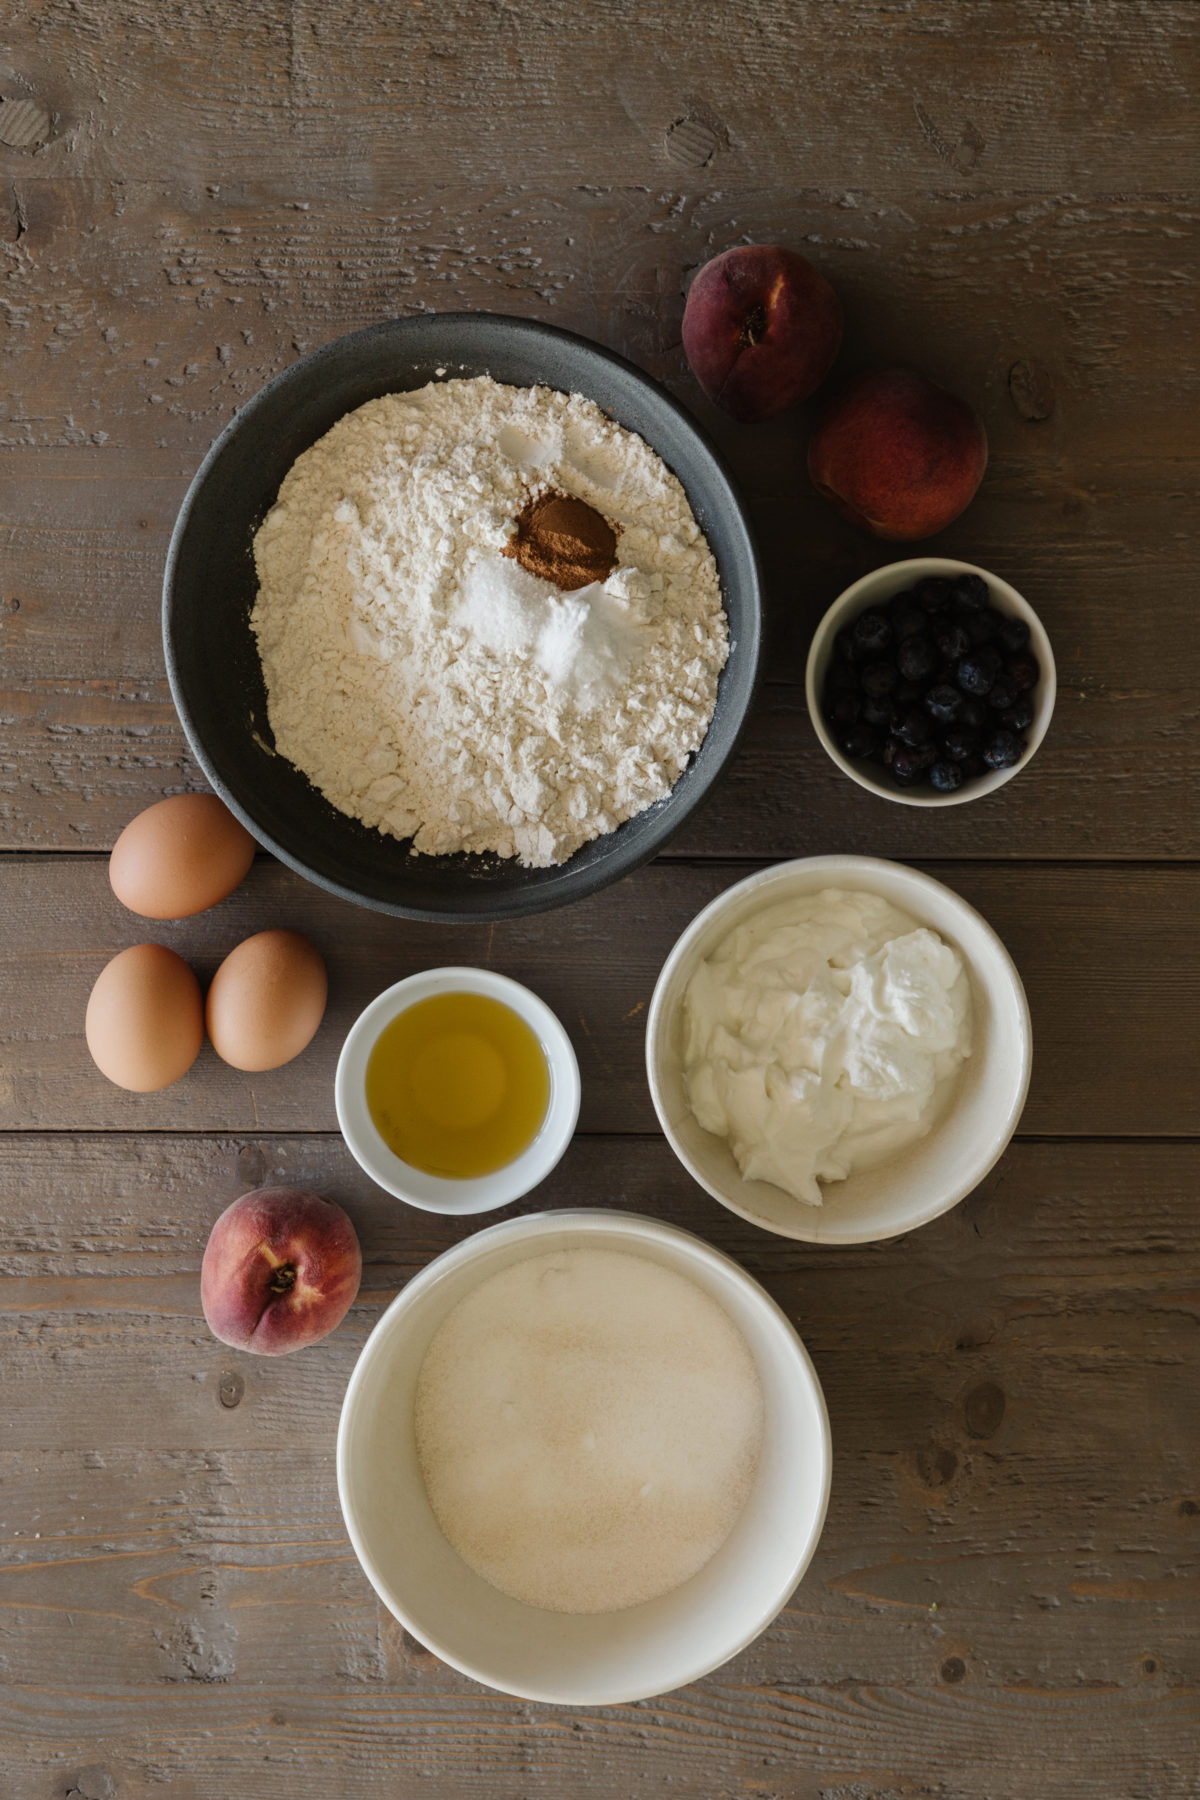 peach cake ingredients in various neutral colored bowls, 3 brown eggs, and some peaches on a rustic wooden table top